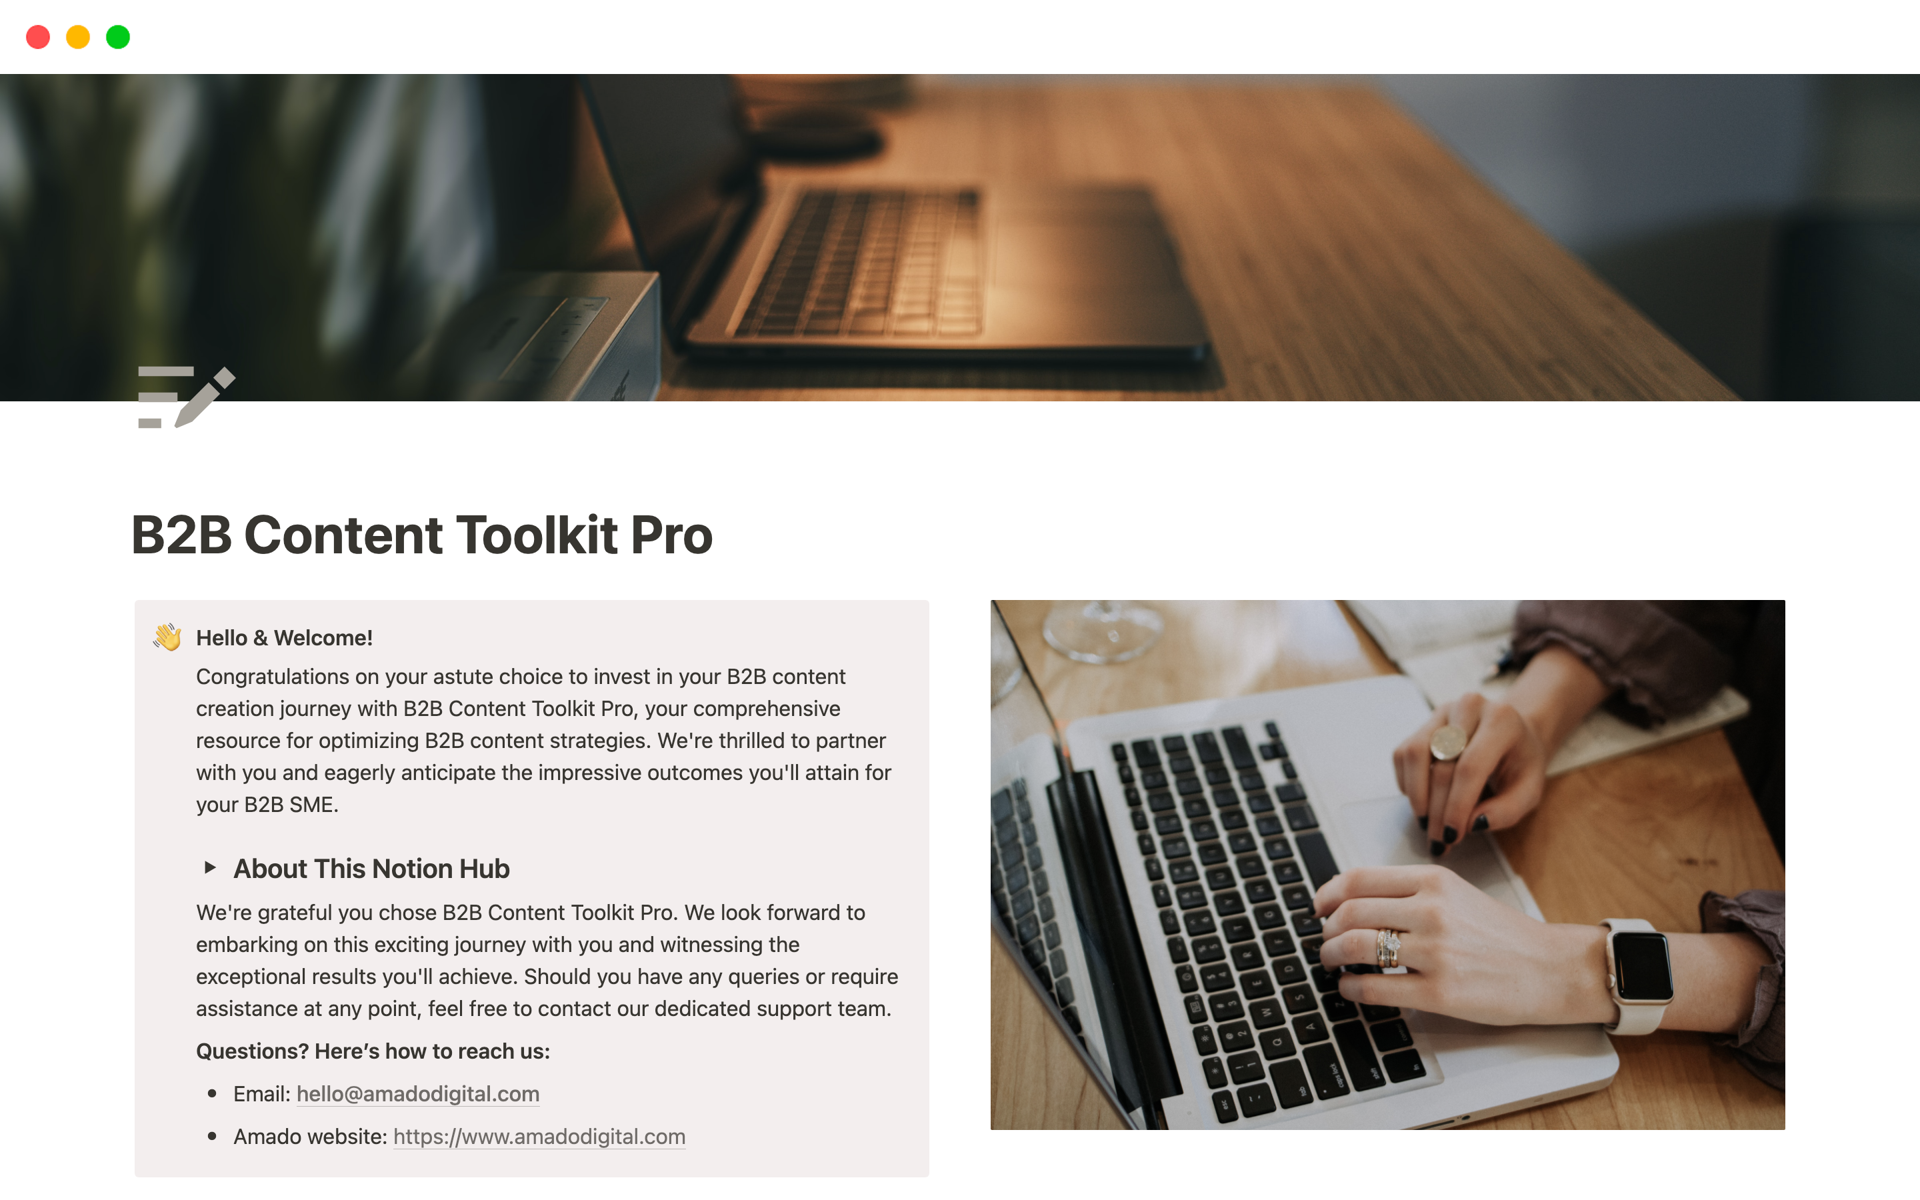 Elevate your B2B communications with our comprehensive B2B Content Toolkit Pro, your ultimate guide to high-impact email campaigns.

